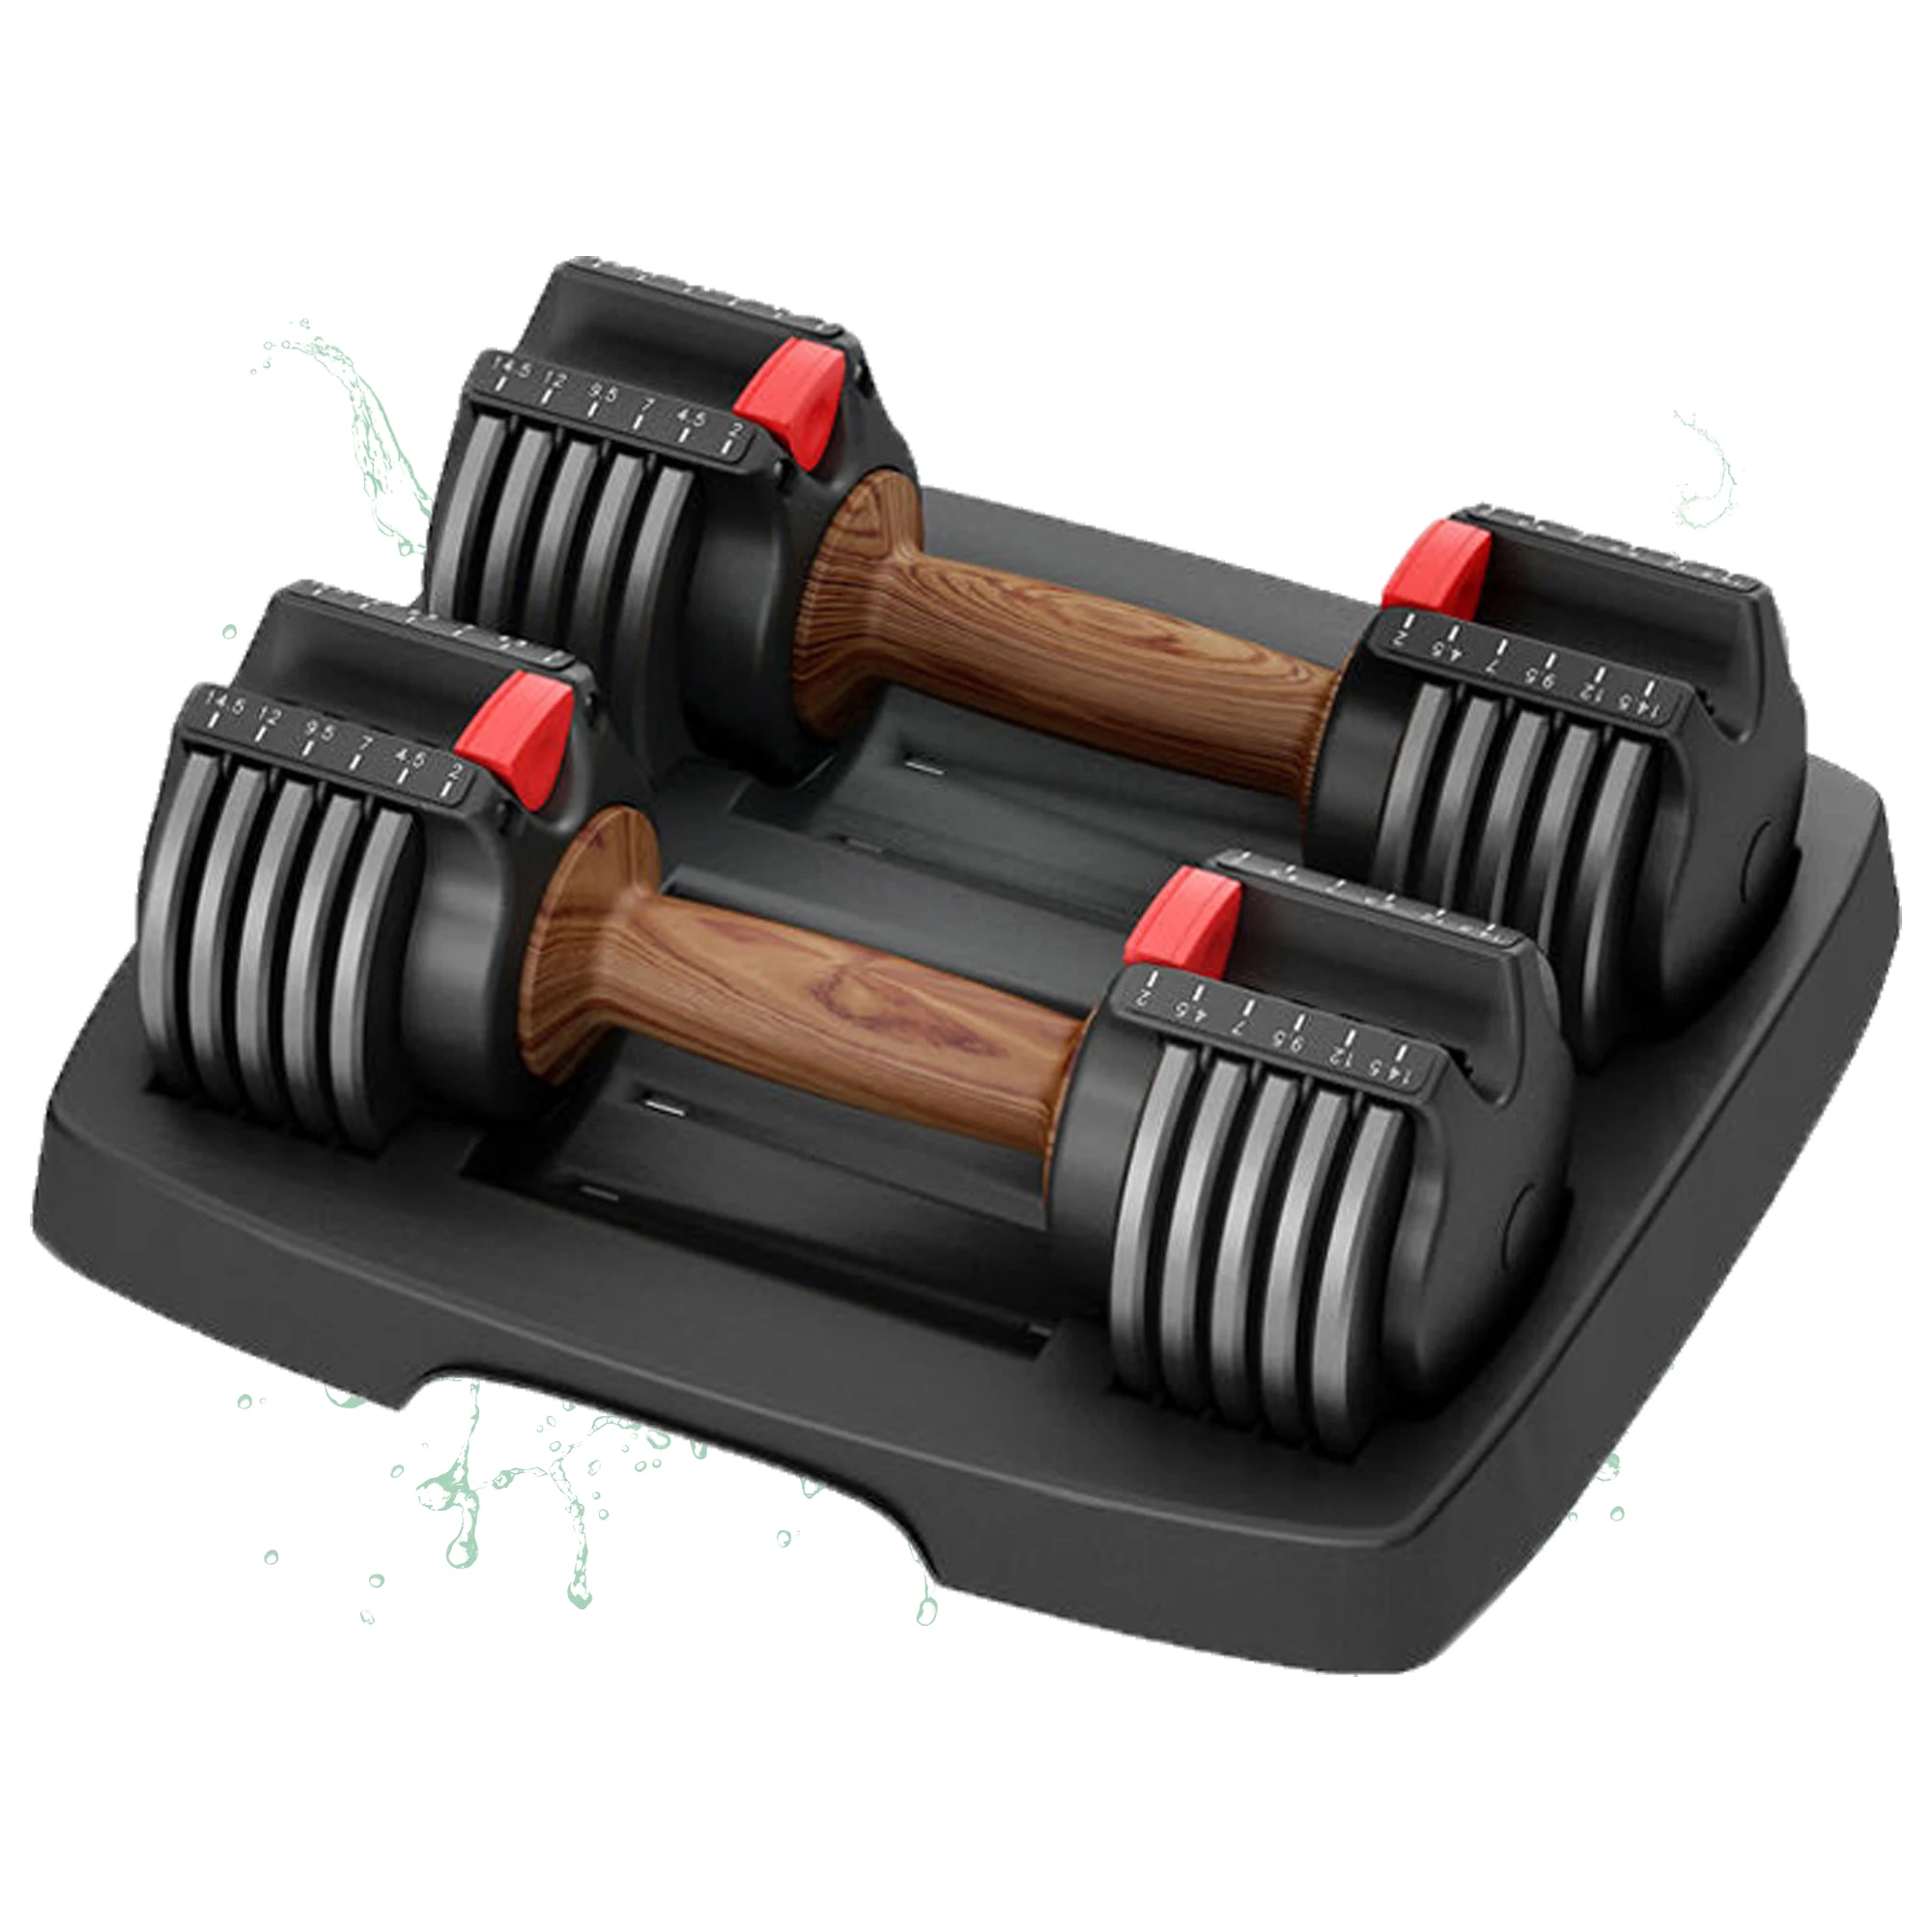 

Gym Equipment Fitness Equipment Home Gym Free weights Exercise Adjustable dumbbell set, Optional